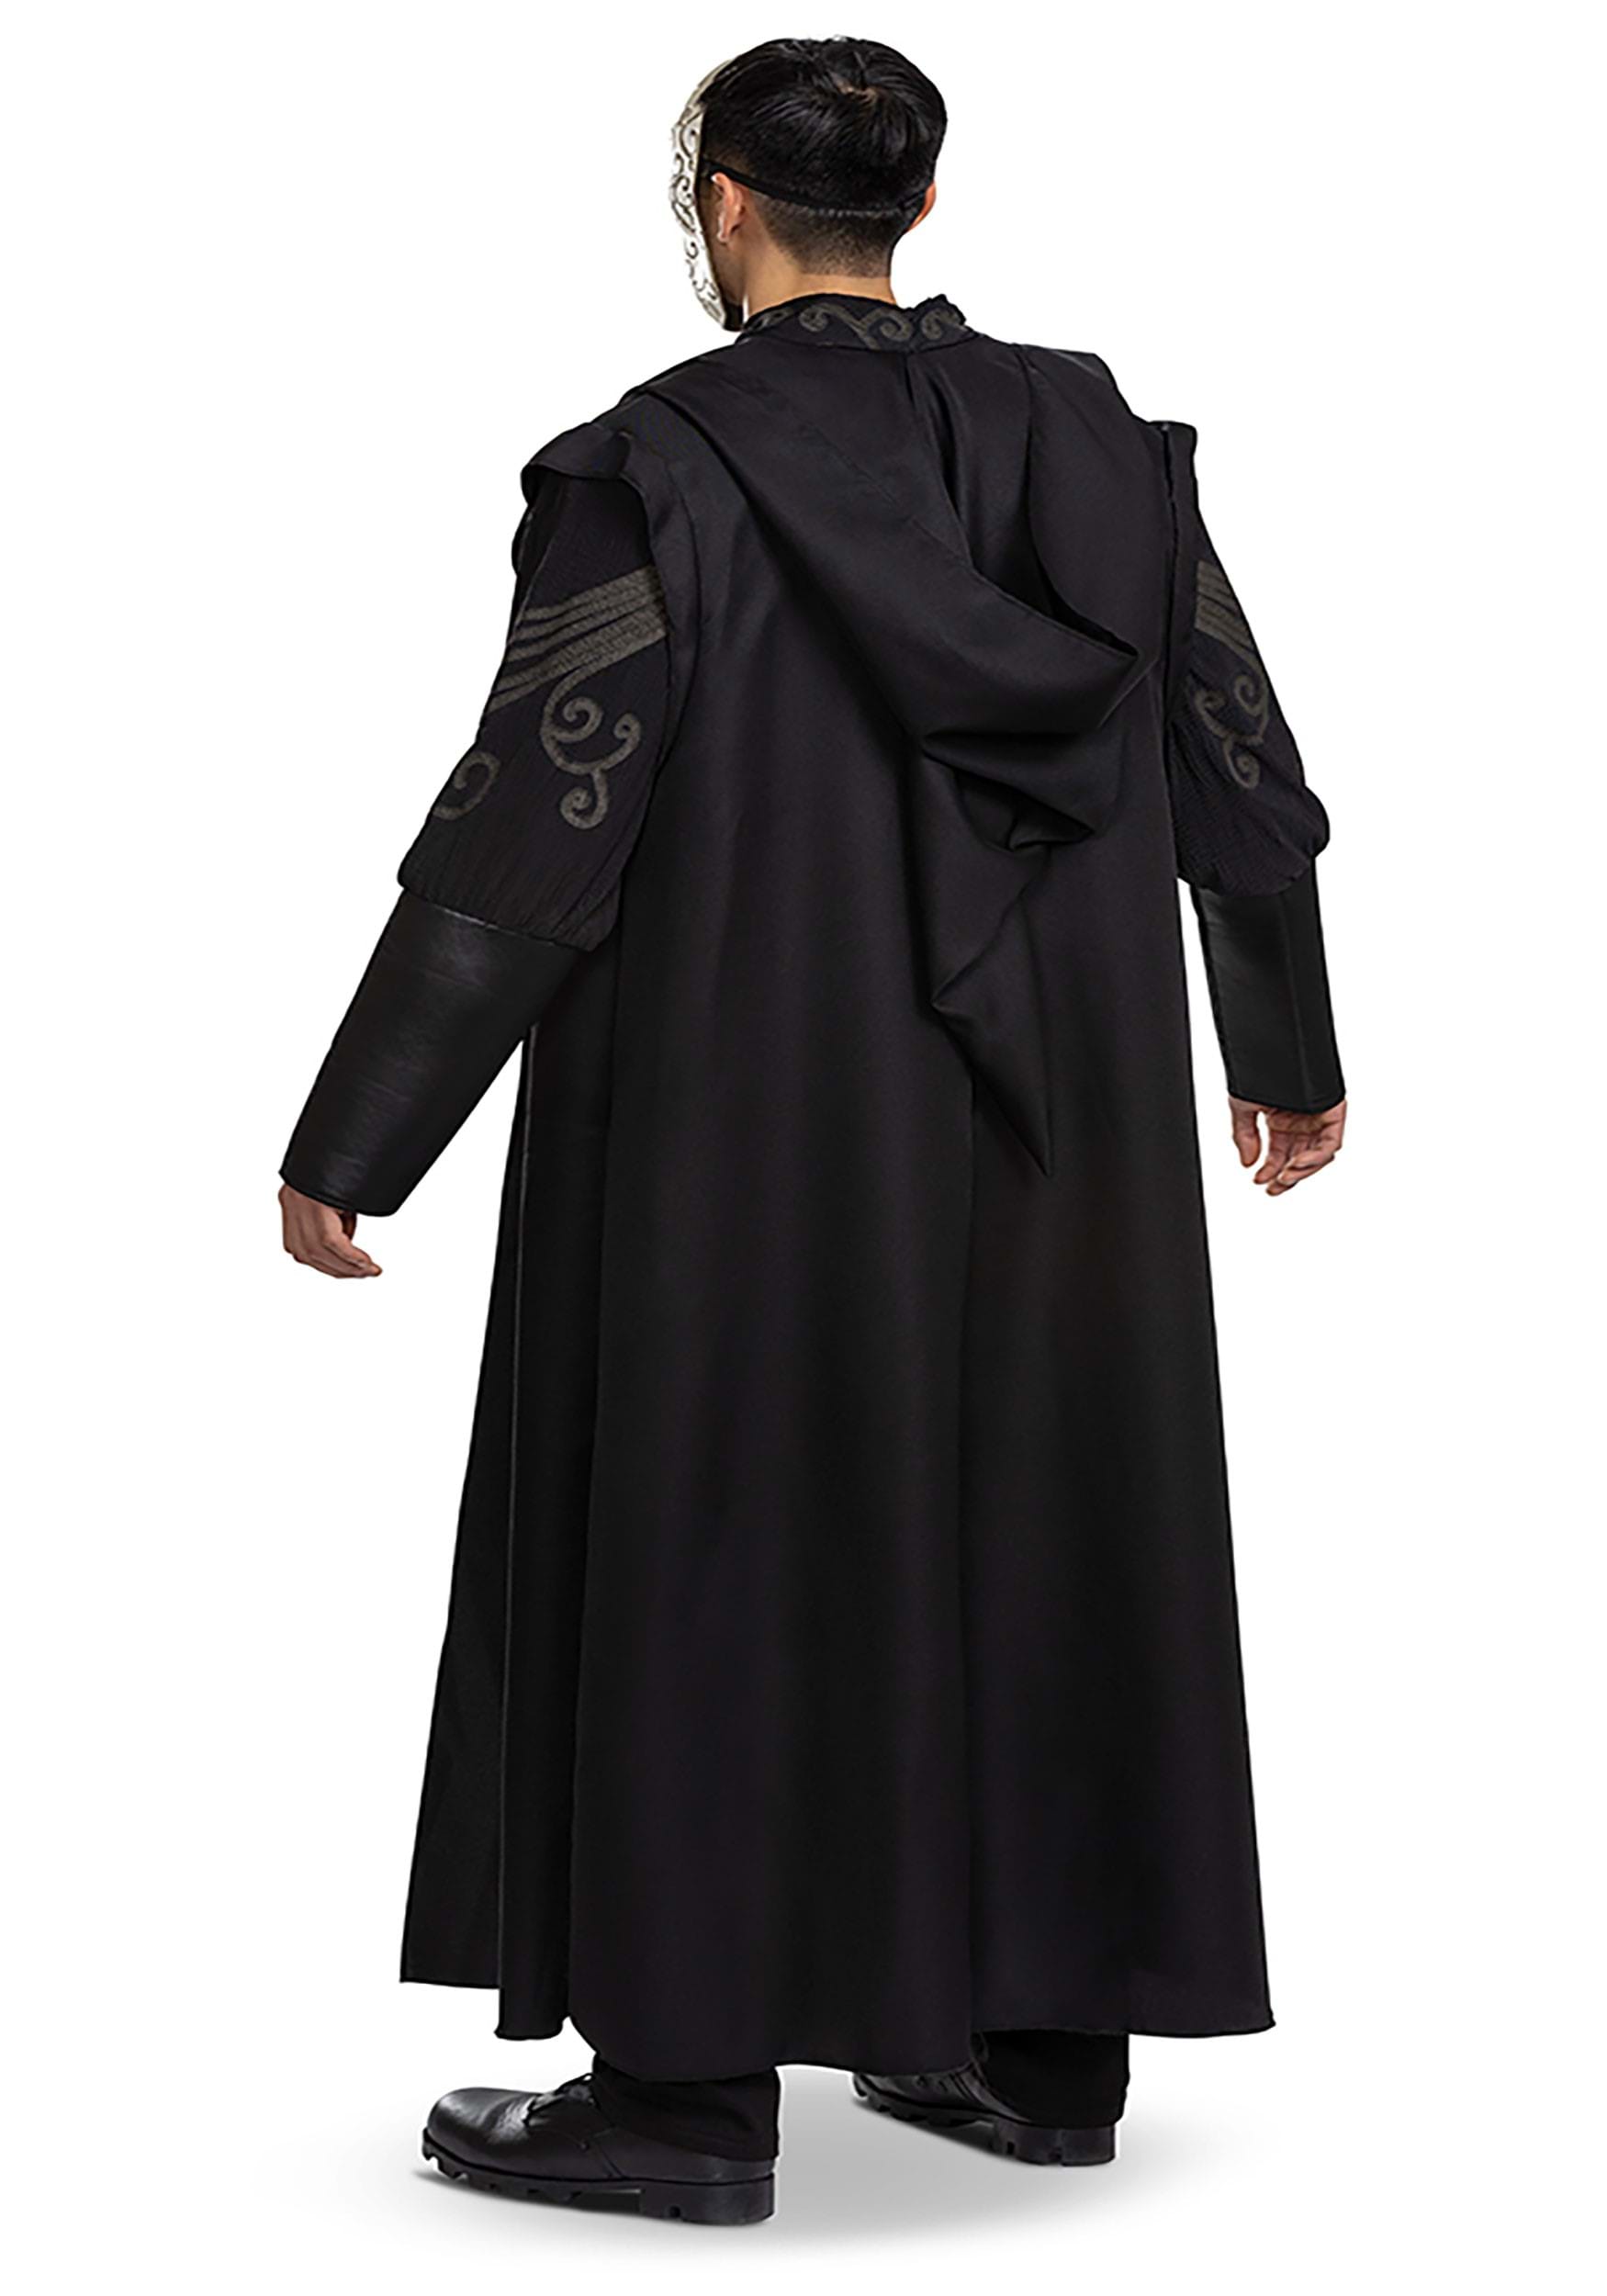 Harry Potter Deluxe Death Eater Costume for Adults